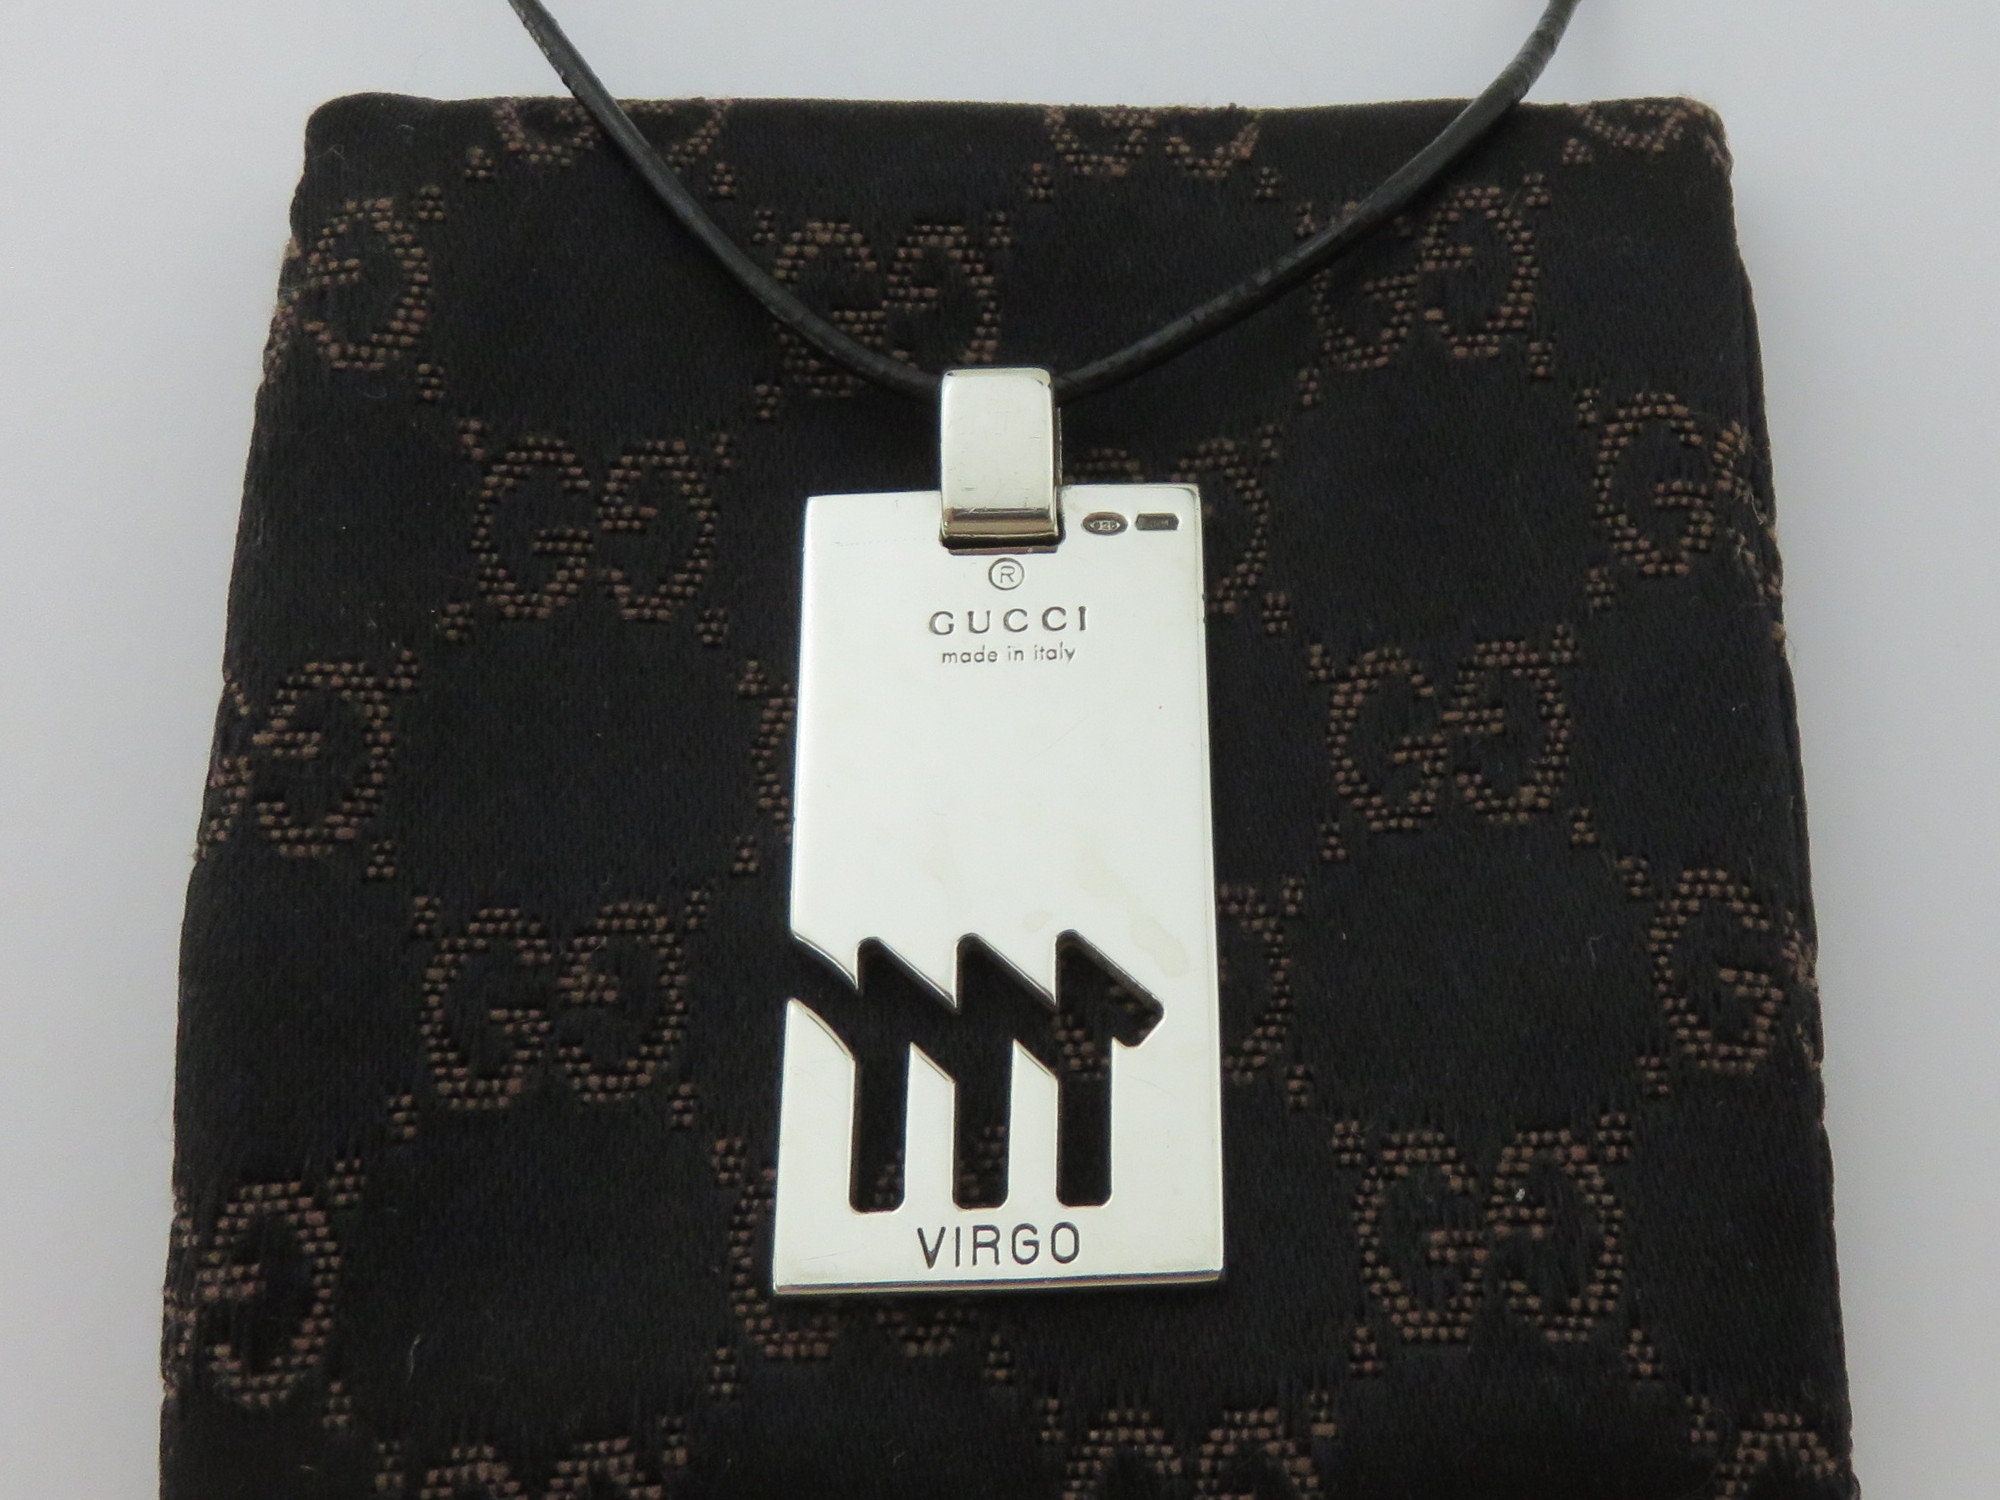 Gucci Sterling Silver VIRGO Pendant Black Leather Cord -  Israel